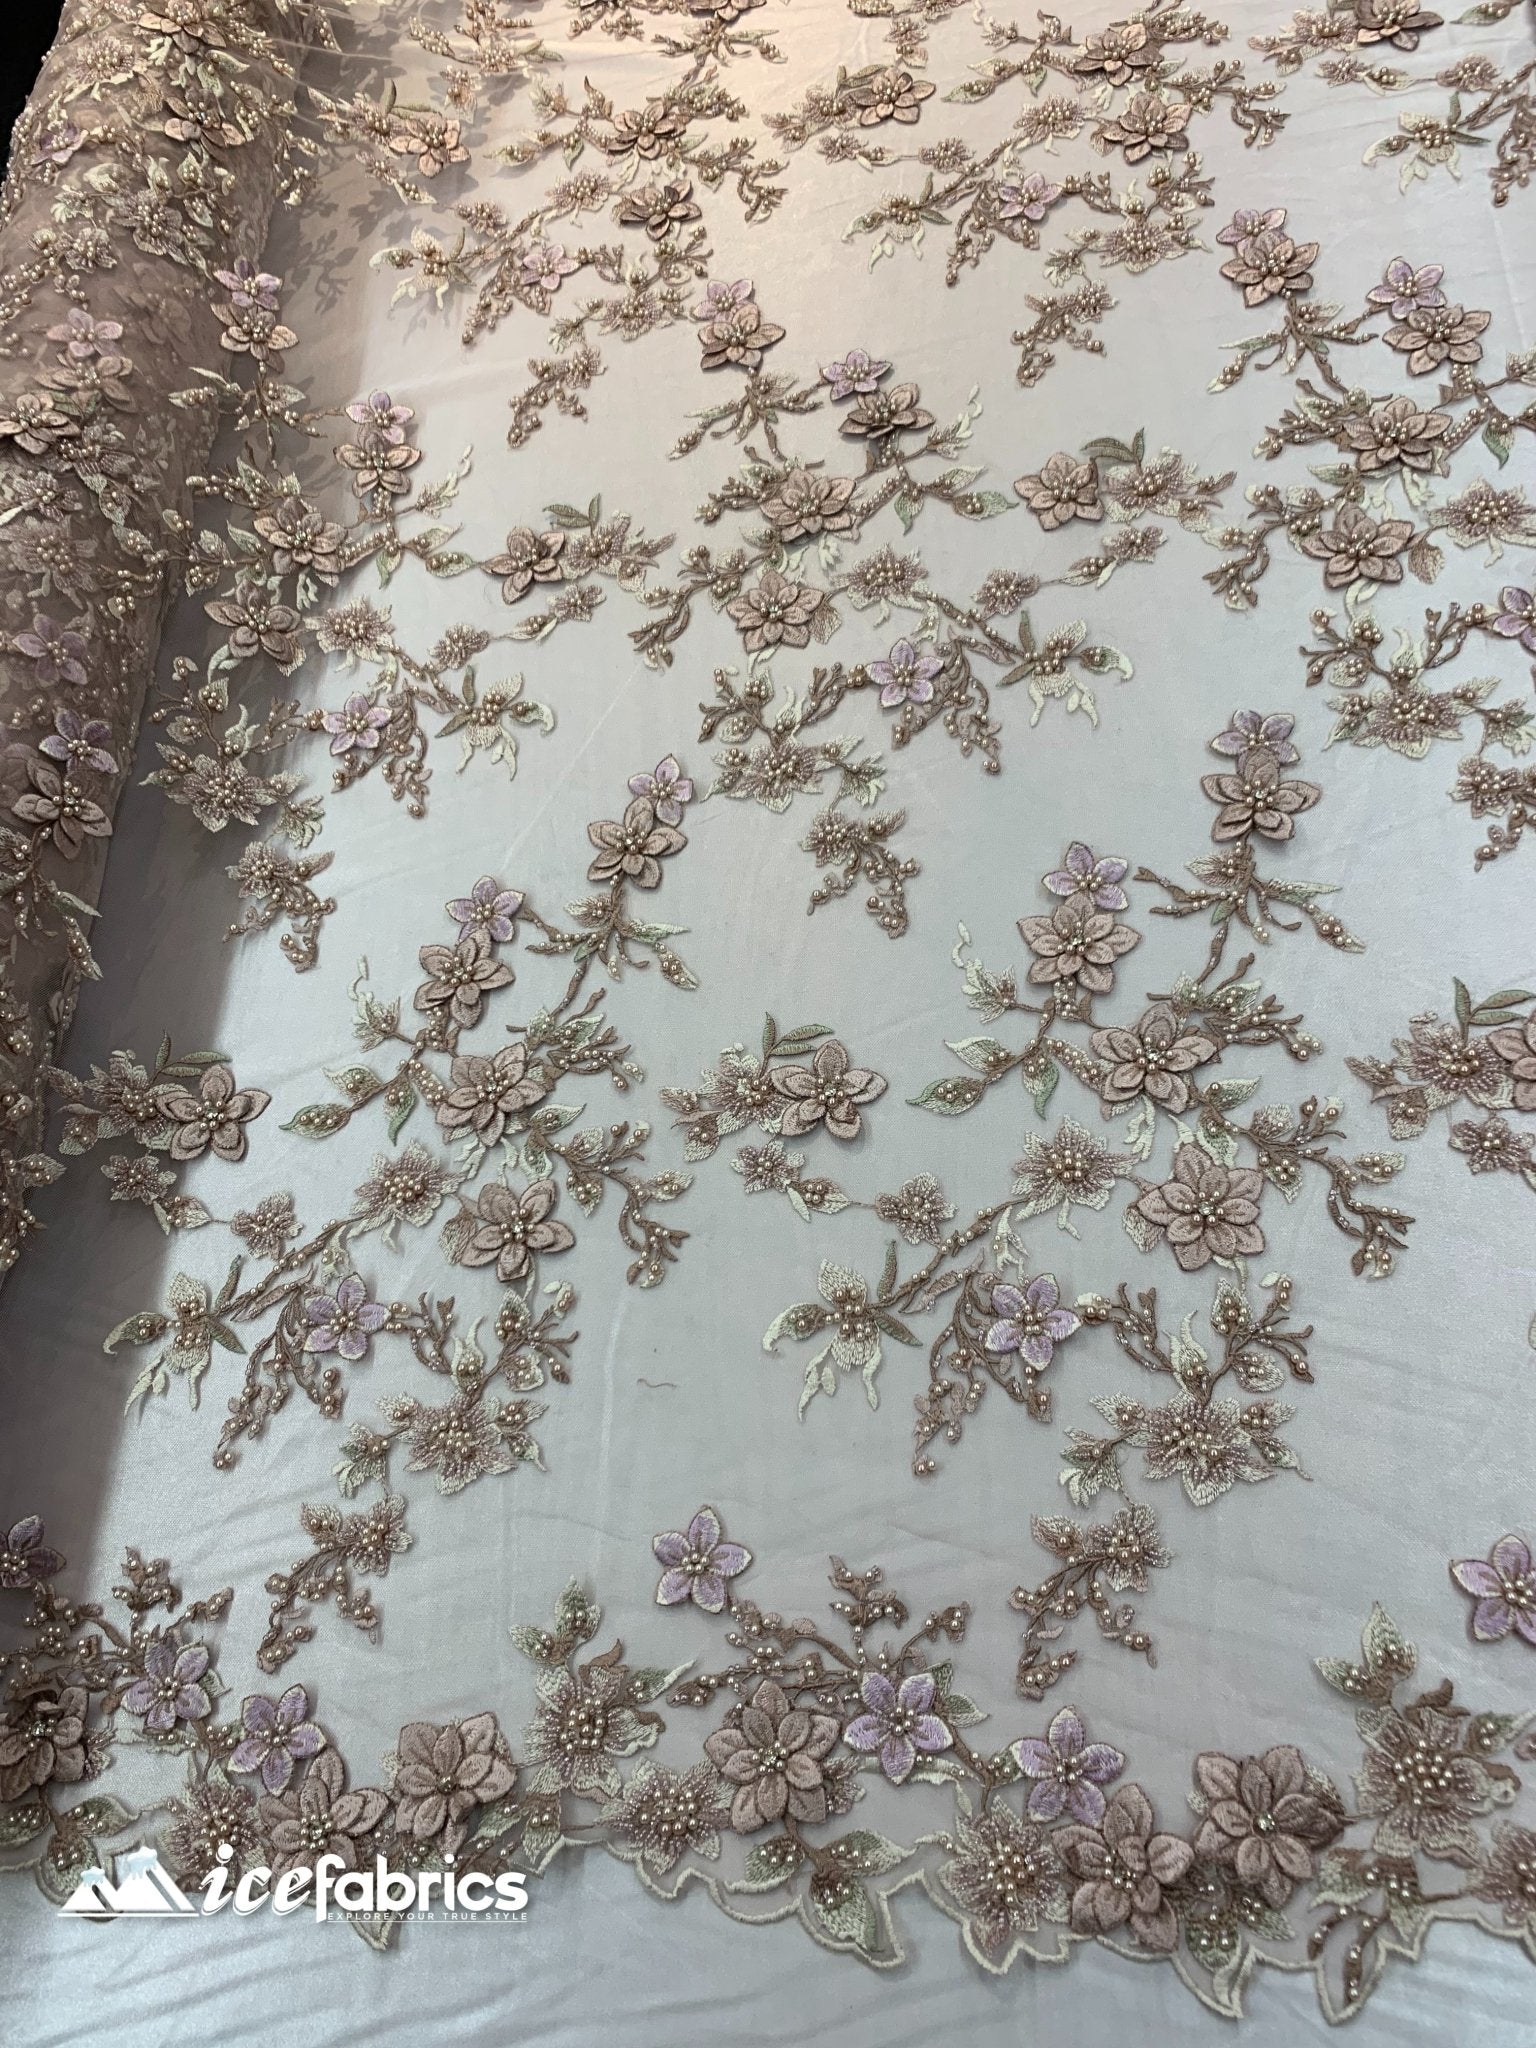 Embroidered Fabric/ 3D Flowers Beaded Fabric/ Lace Fabric/ Rose GoldICE FABRICSICE FABRICSRose GoldEmbroidered Fabric/ 3D Flowers Beaded Fabric/ Lace Fabric/ Rose Gold ICE FABRICS